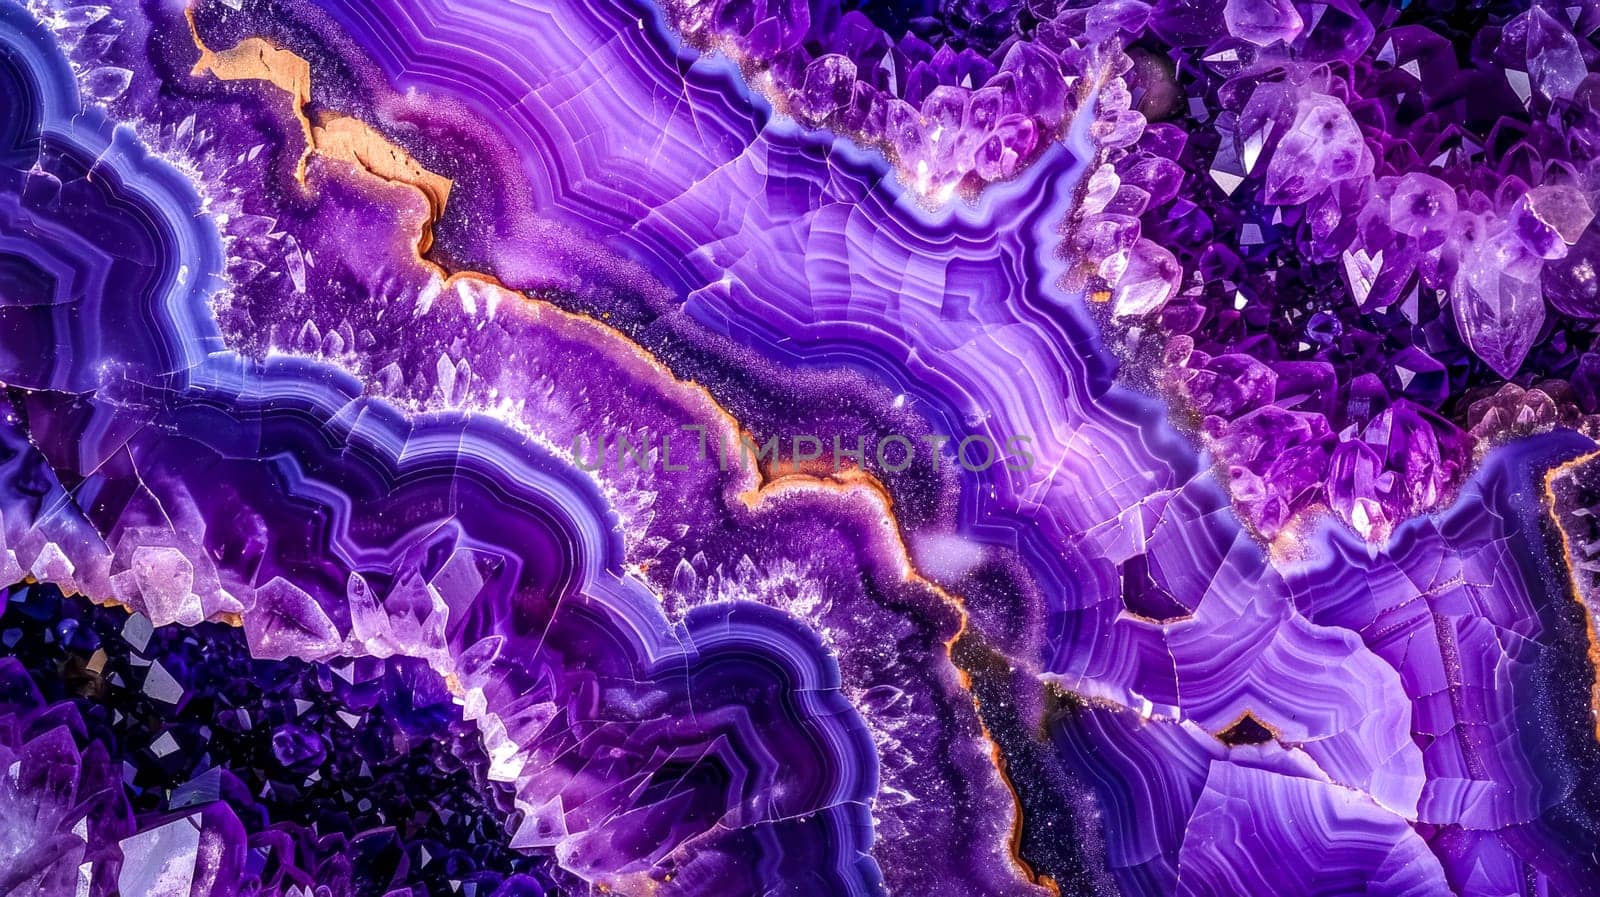 High-resolution image of an amethyst geode showcasing its stunning purple hues and natural patterns by Edophoto